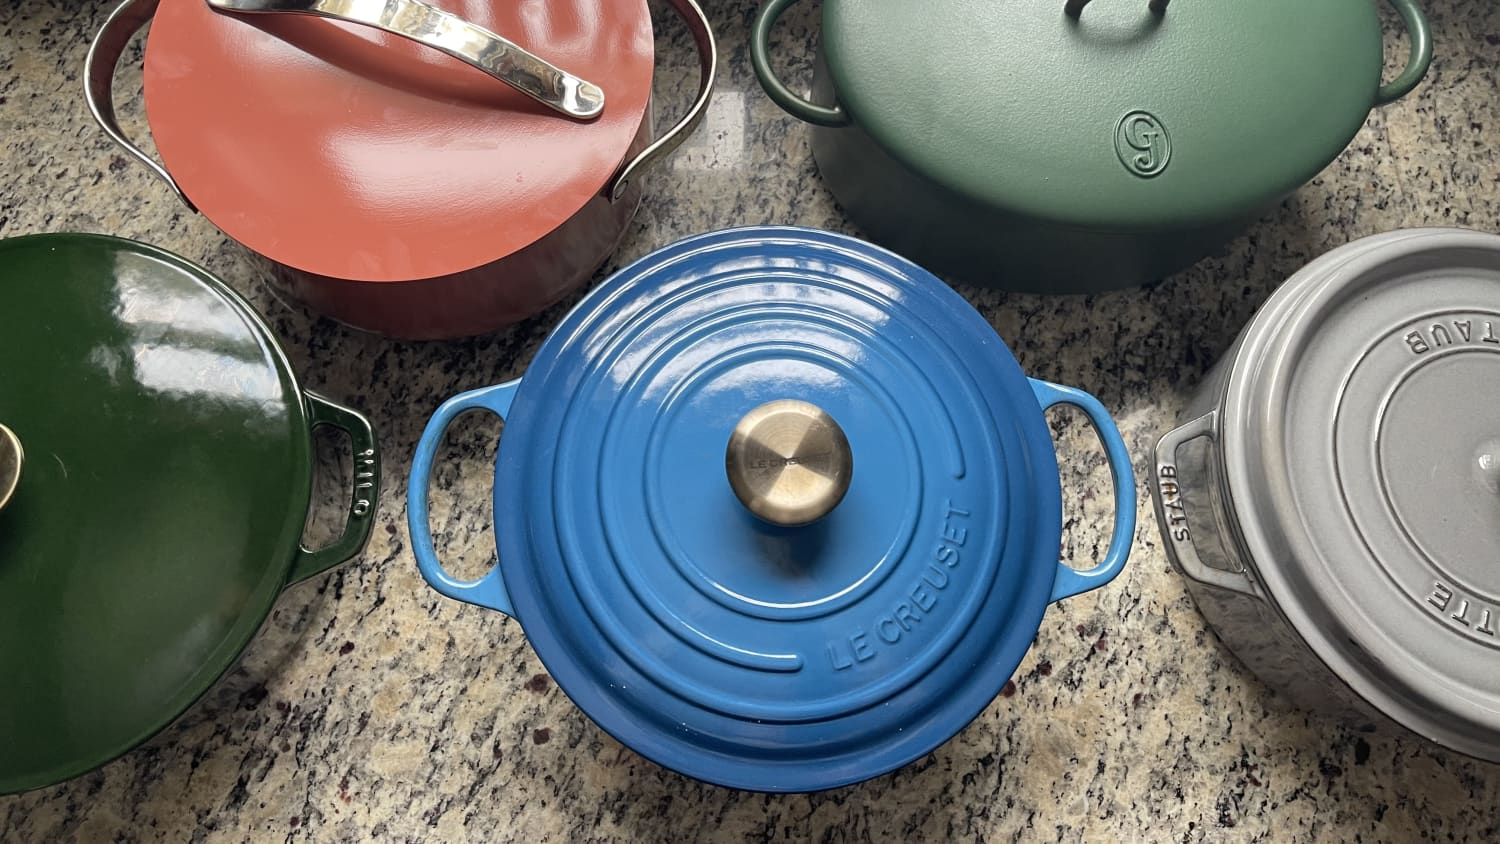 Le Creuset releases cast iron bread oven - Chef at Home